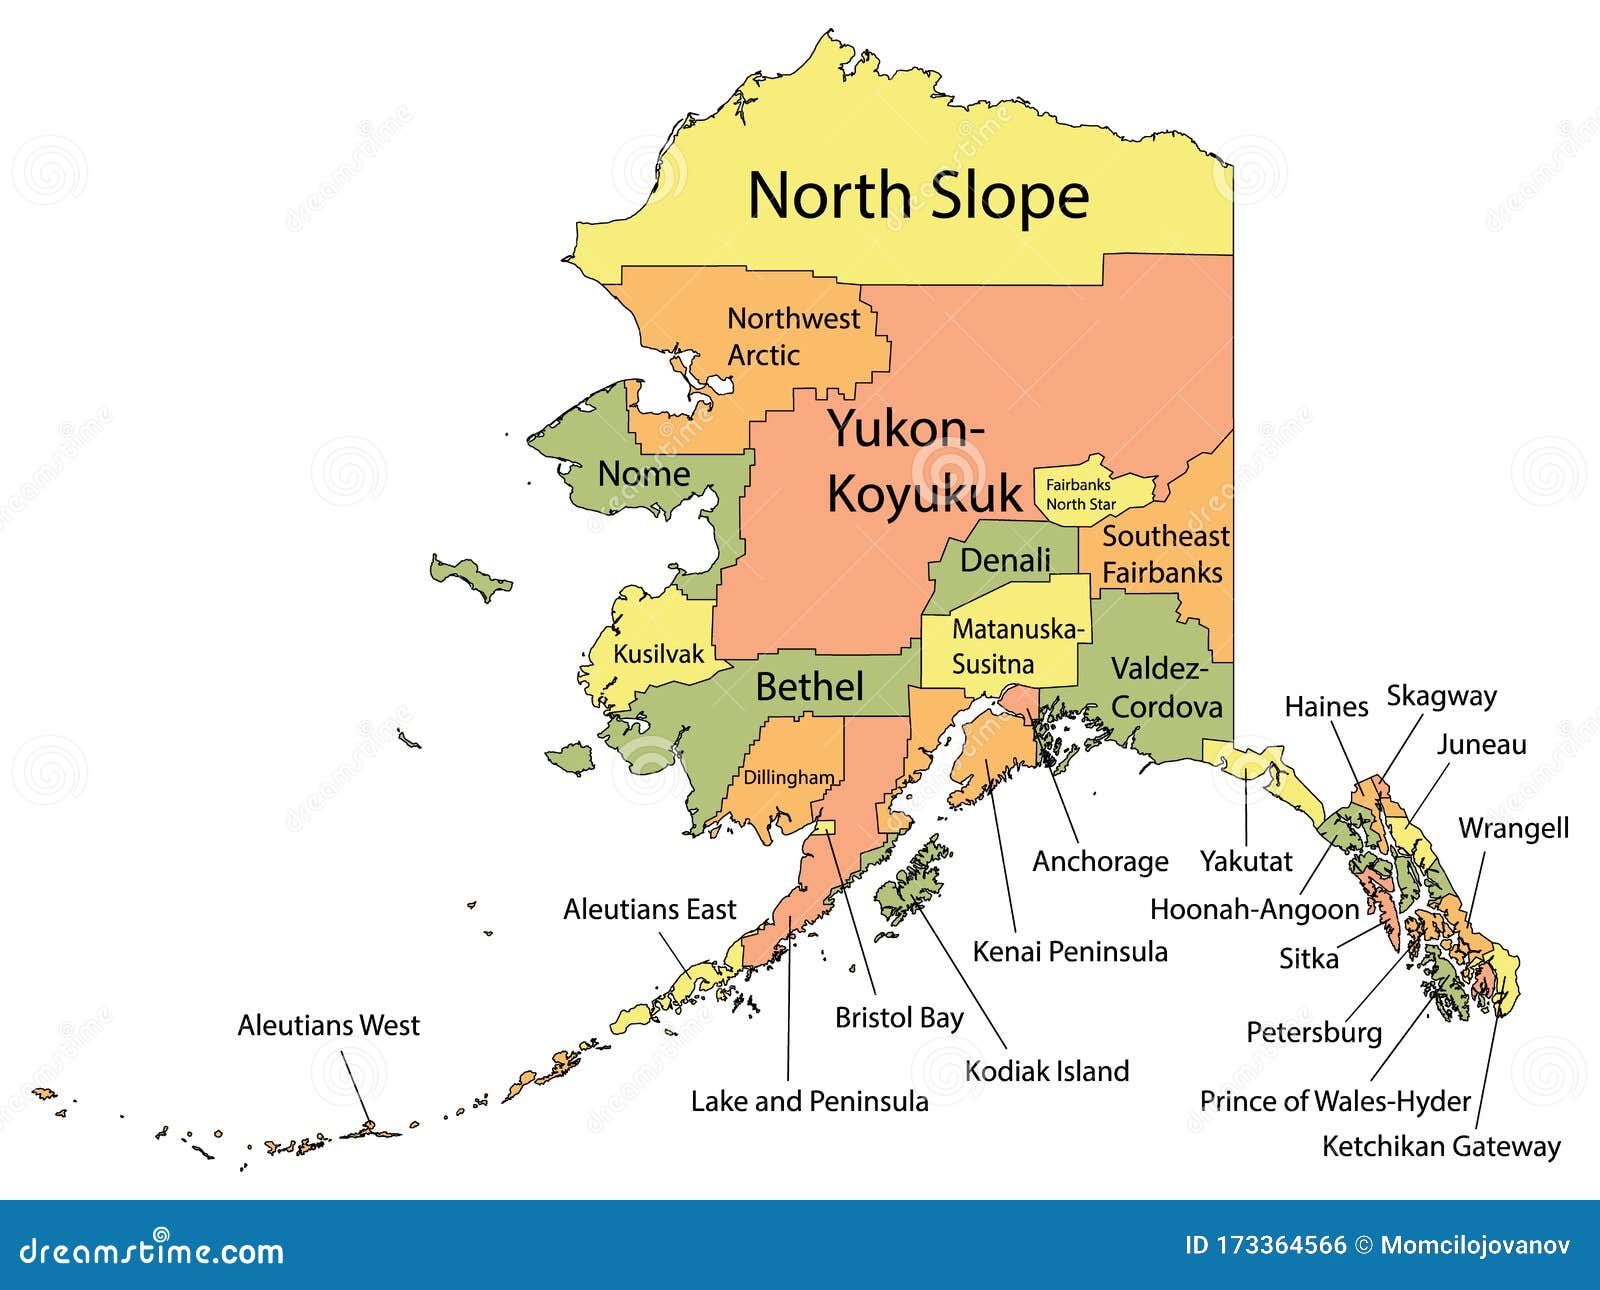 List of: All Counties in Alaska